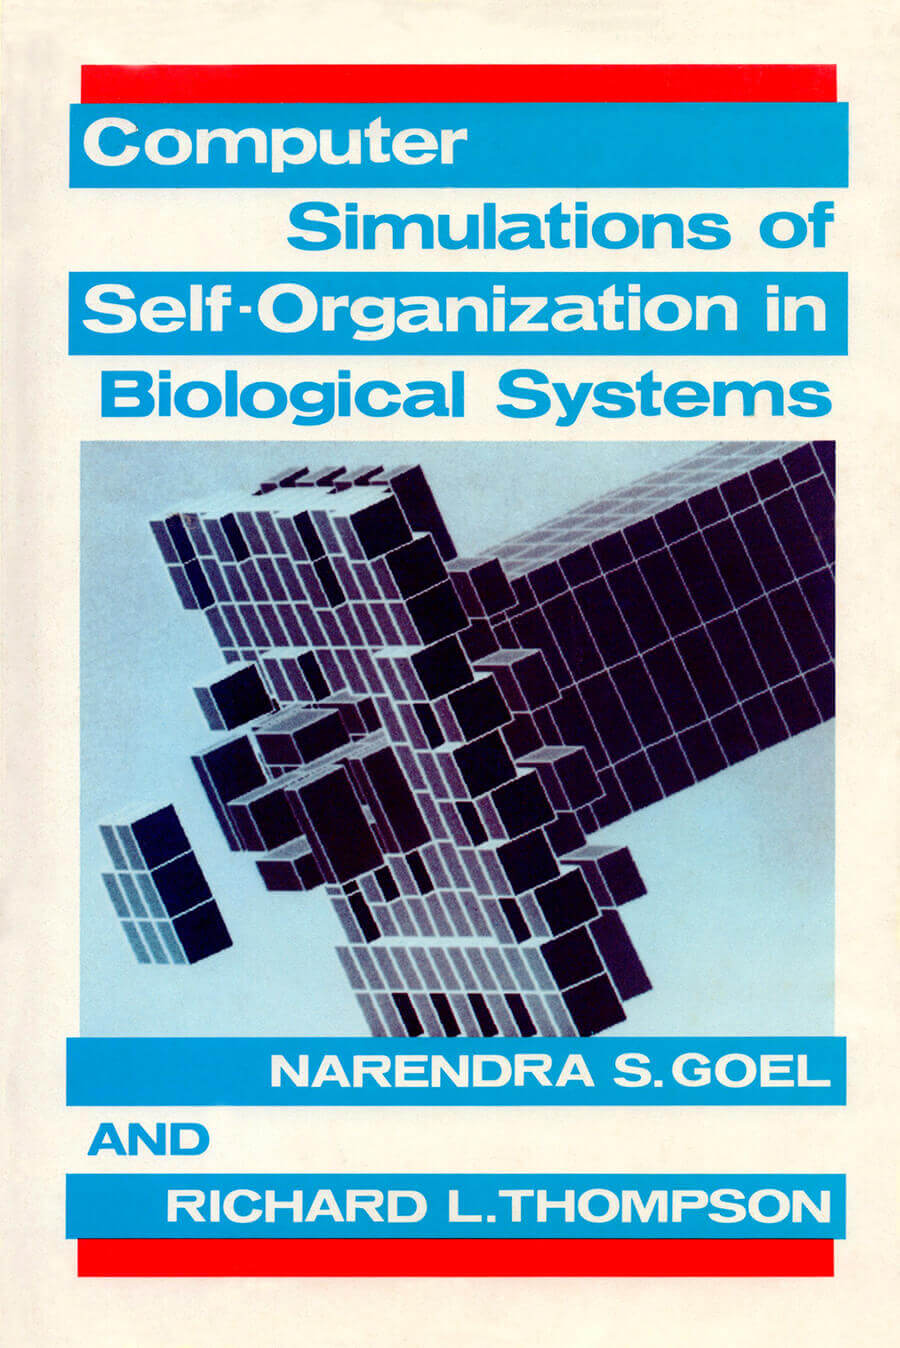 Computer Simulations of Self-Organization in Biological Systems